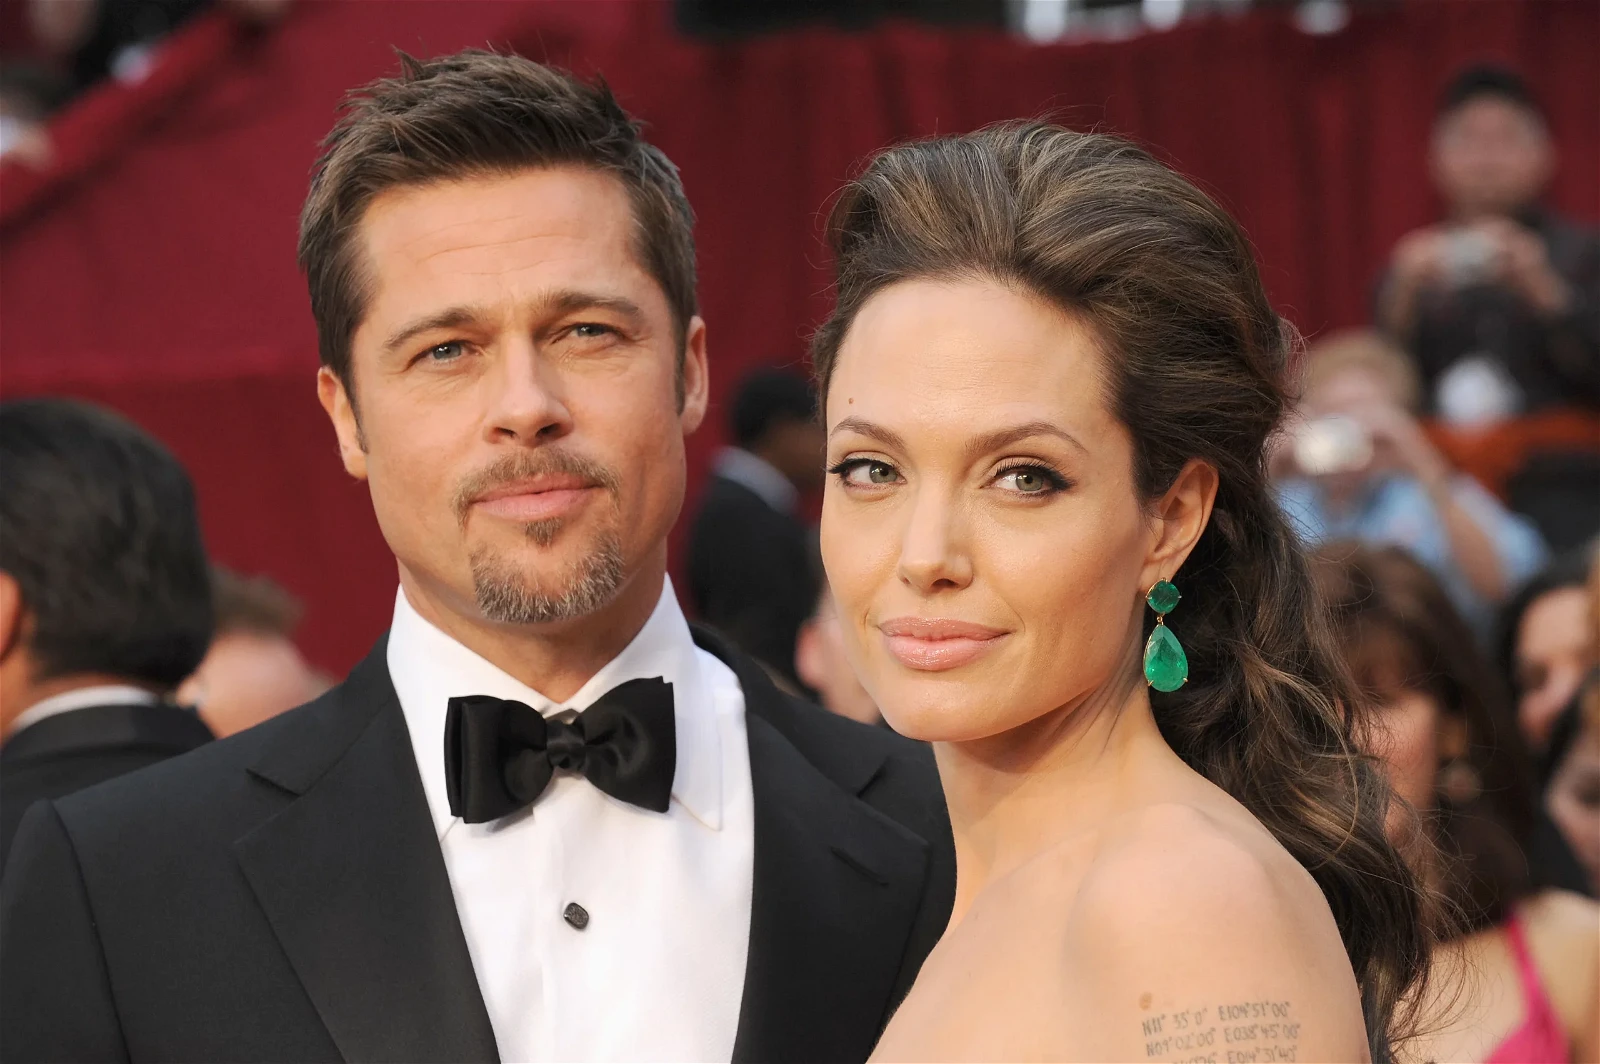 Angelina Jolie and Brad Pitt have been declared singles since 2019.